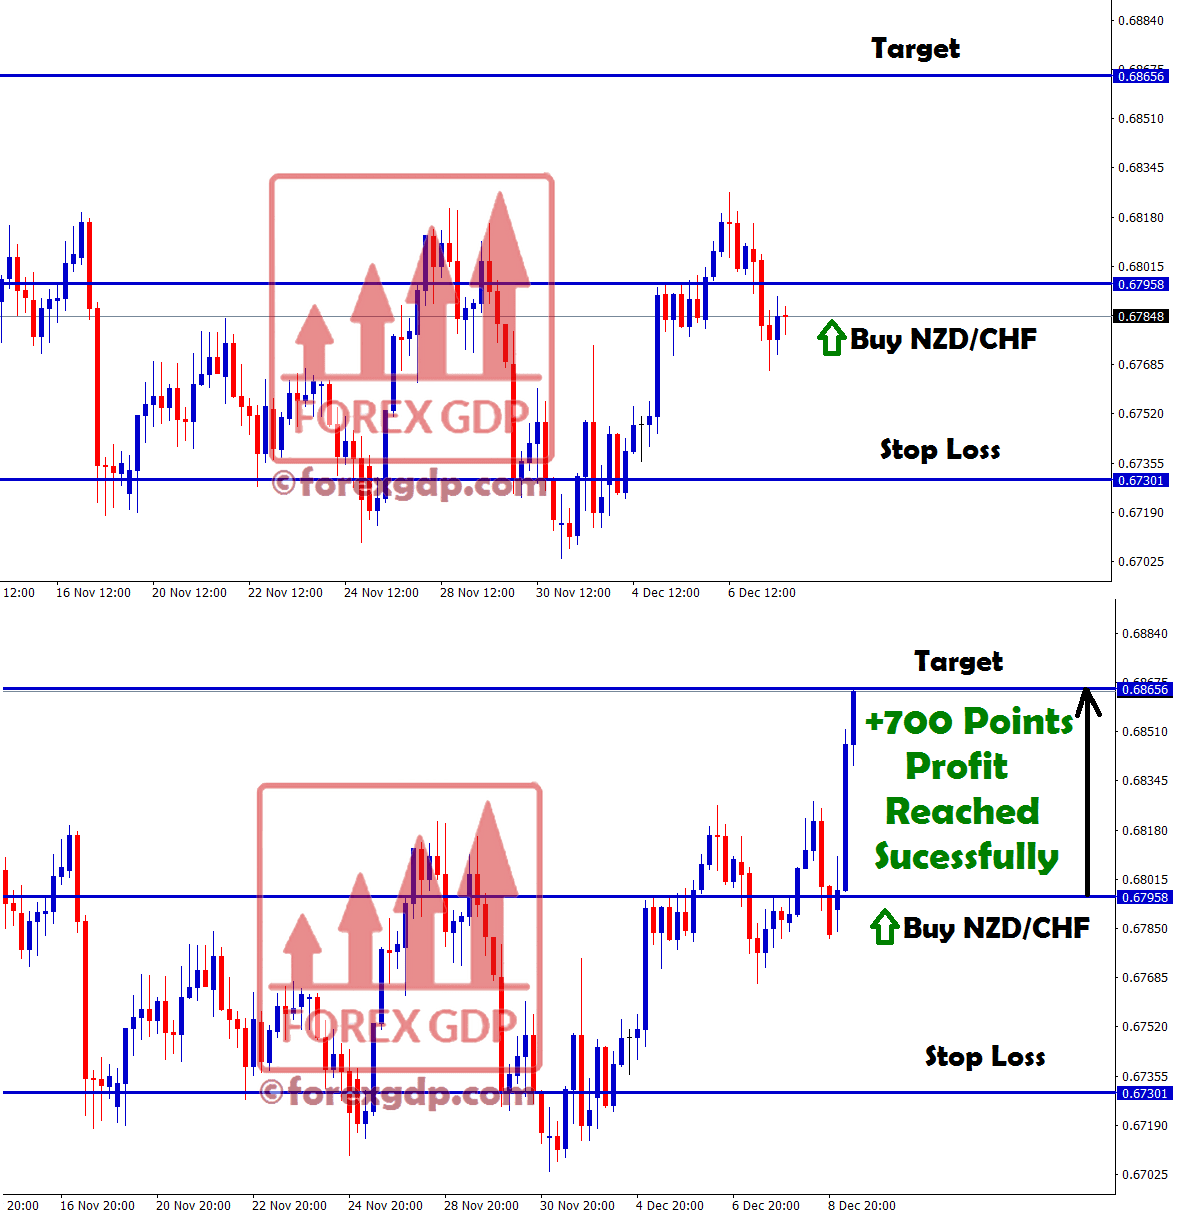 +700 points profit made in FOREX GDP buy signal